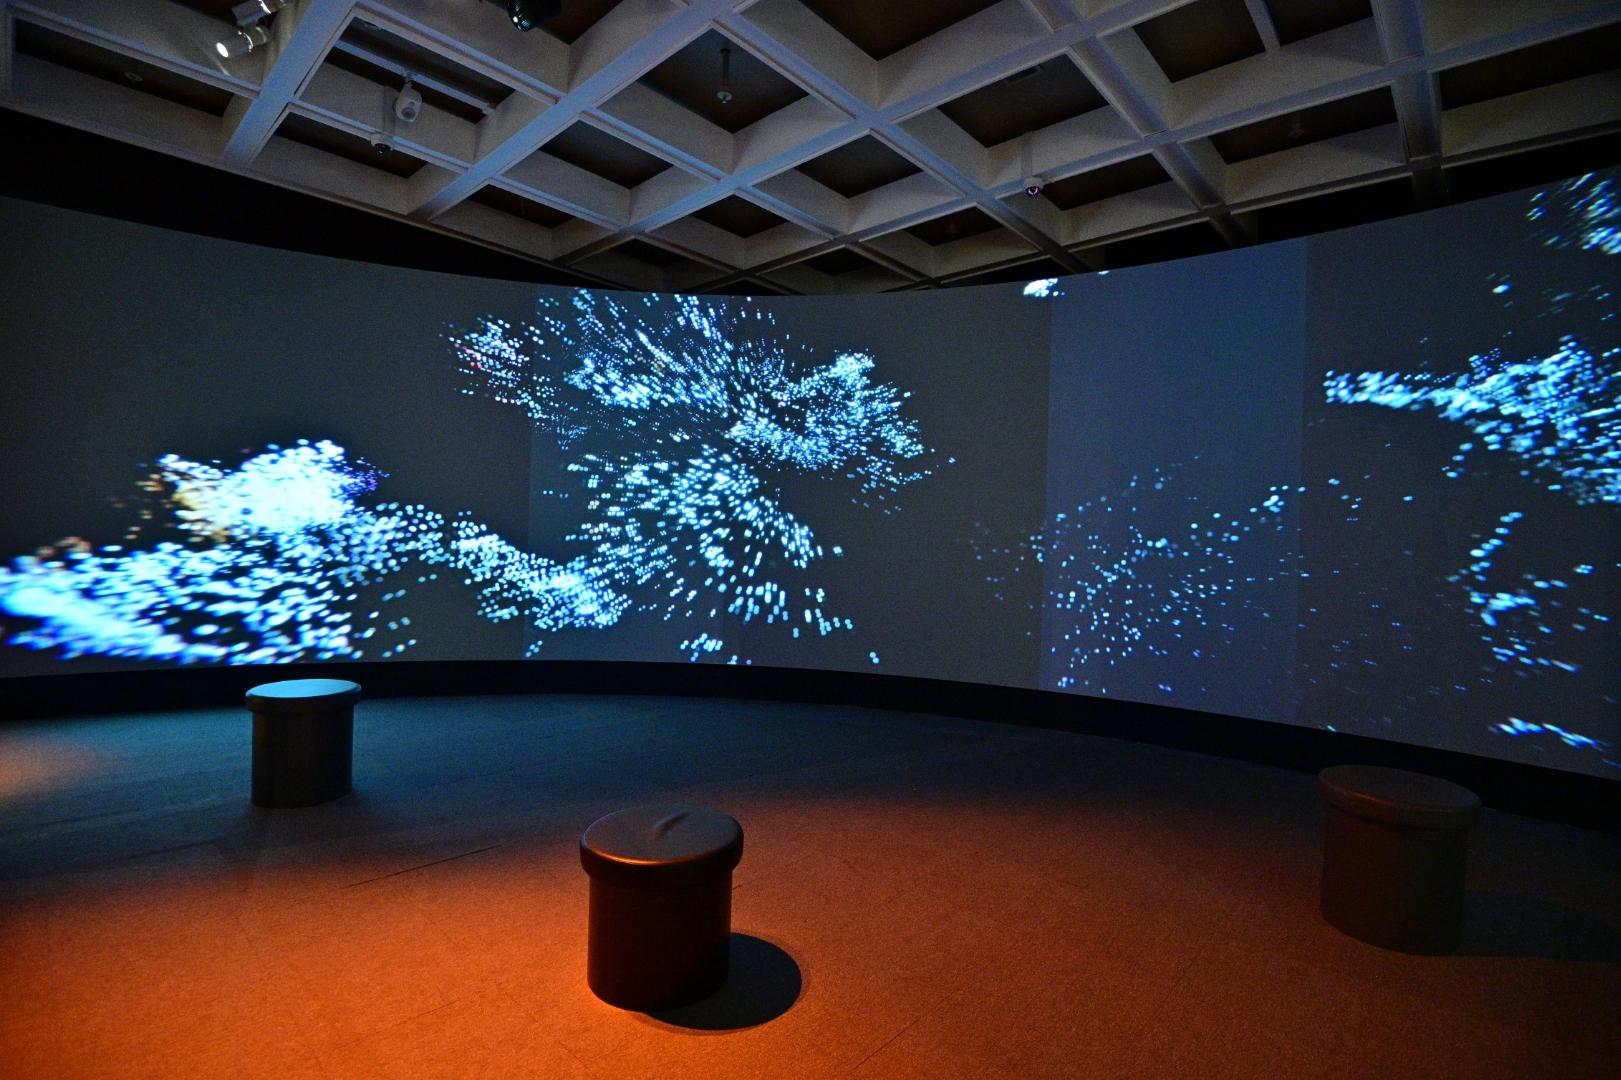 The "City Rhymes: The Melodious Notes of Calligraphy" exhibition will be held from tomorrow (July 22) at the Hong Kong Museum of Art. Photo shows a projection wall created by multimedia artist Ng Tsz-kwan.